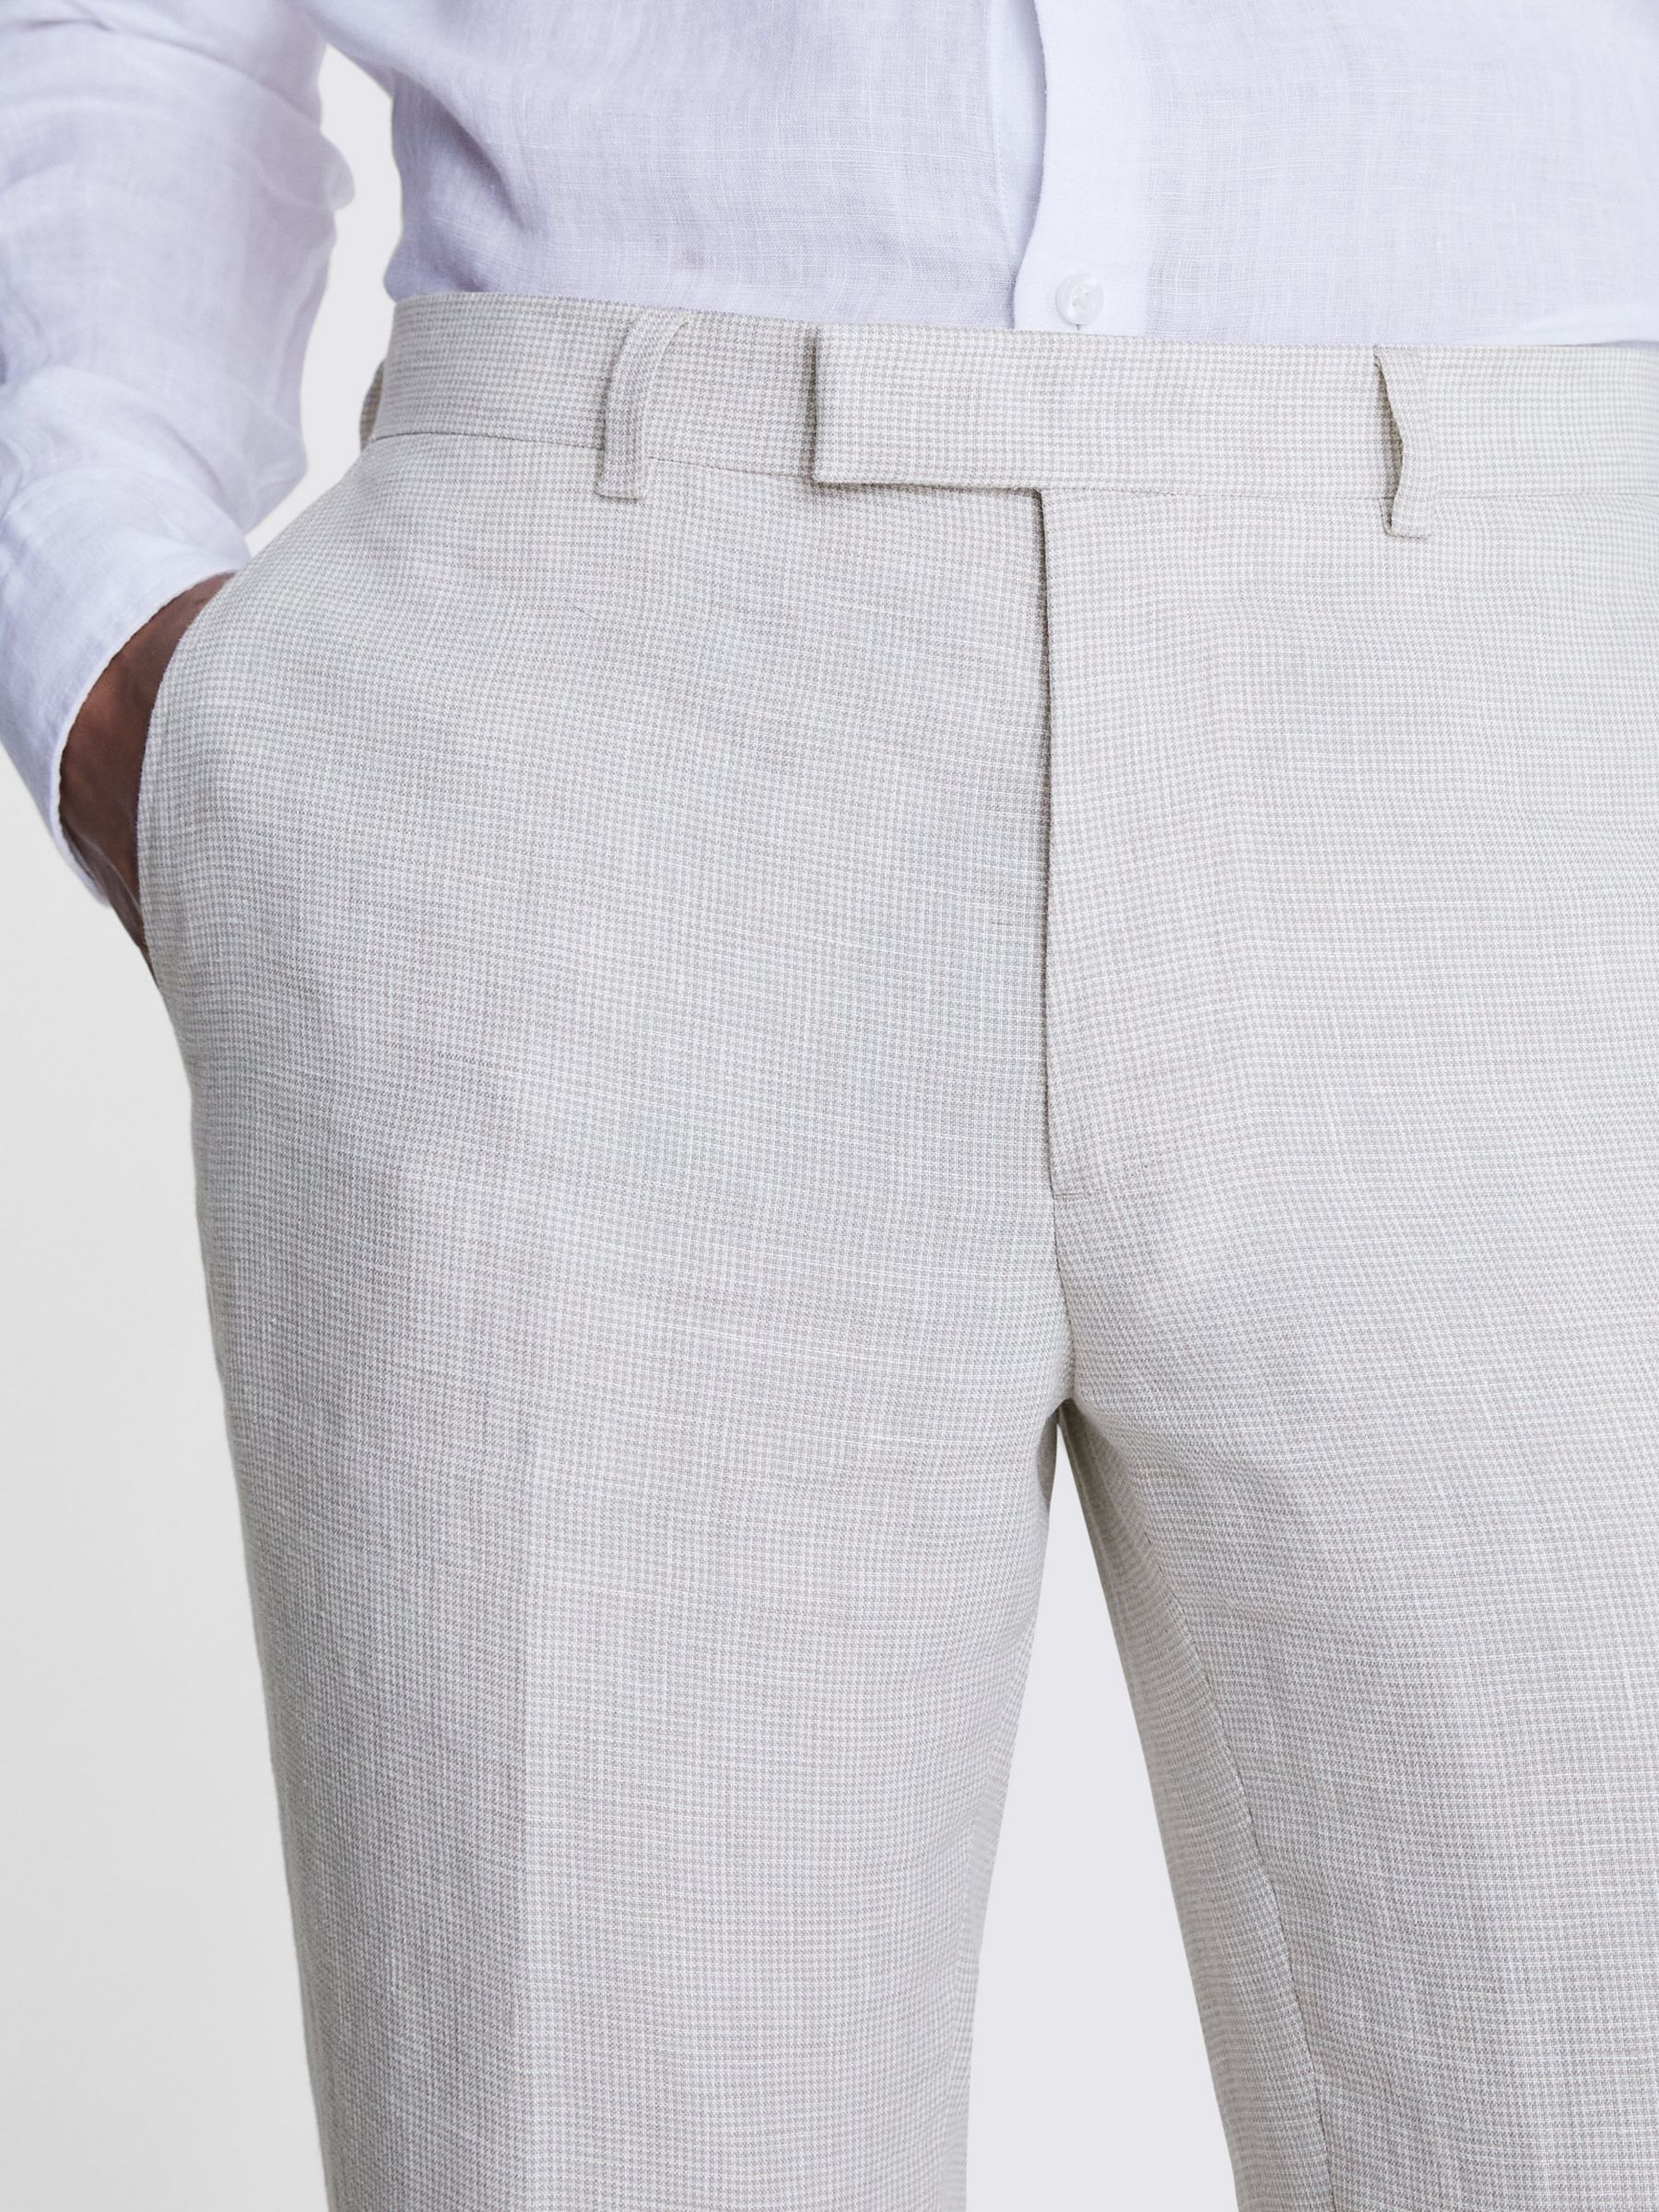 Buy Moss Slim Fit Puppytooth Trousers, Stone Online at johnlewis.com